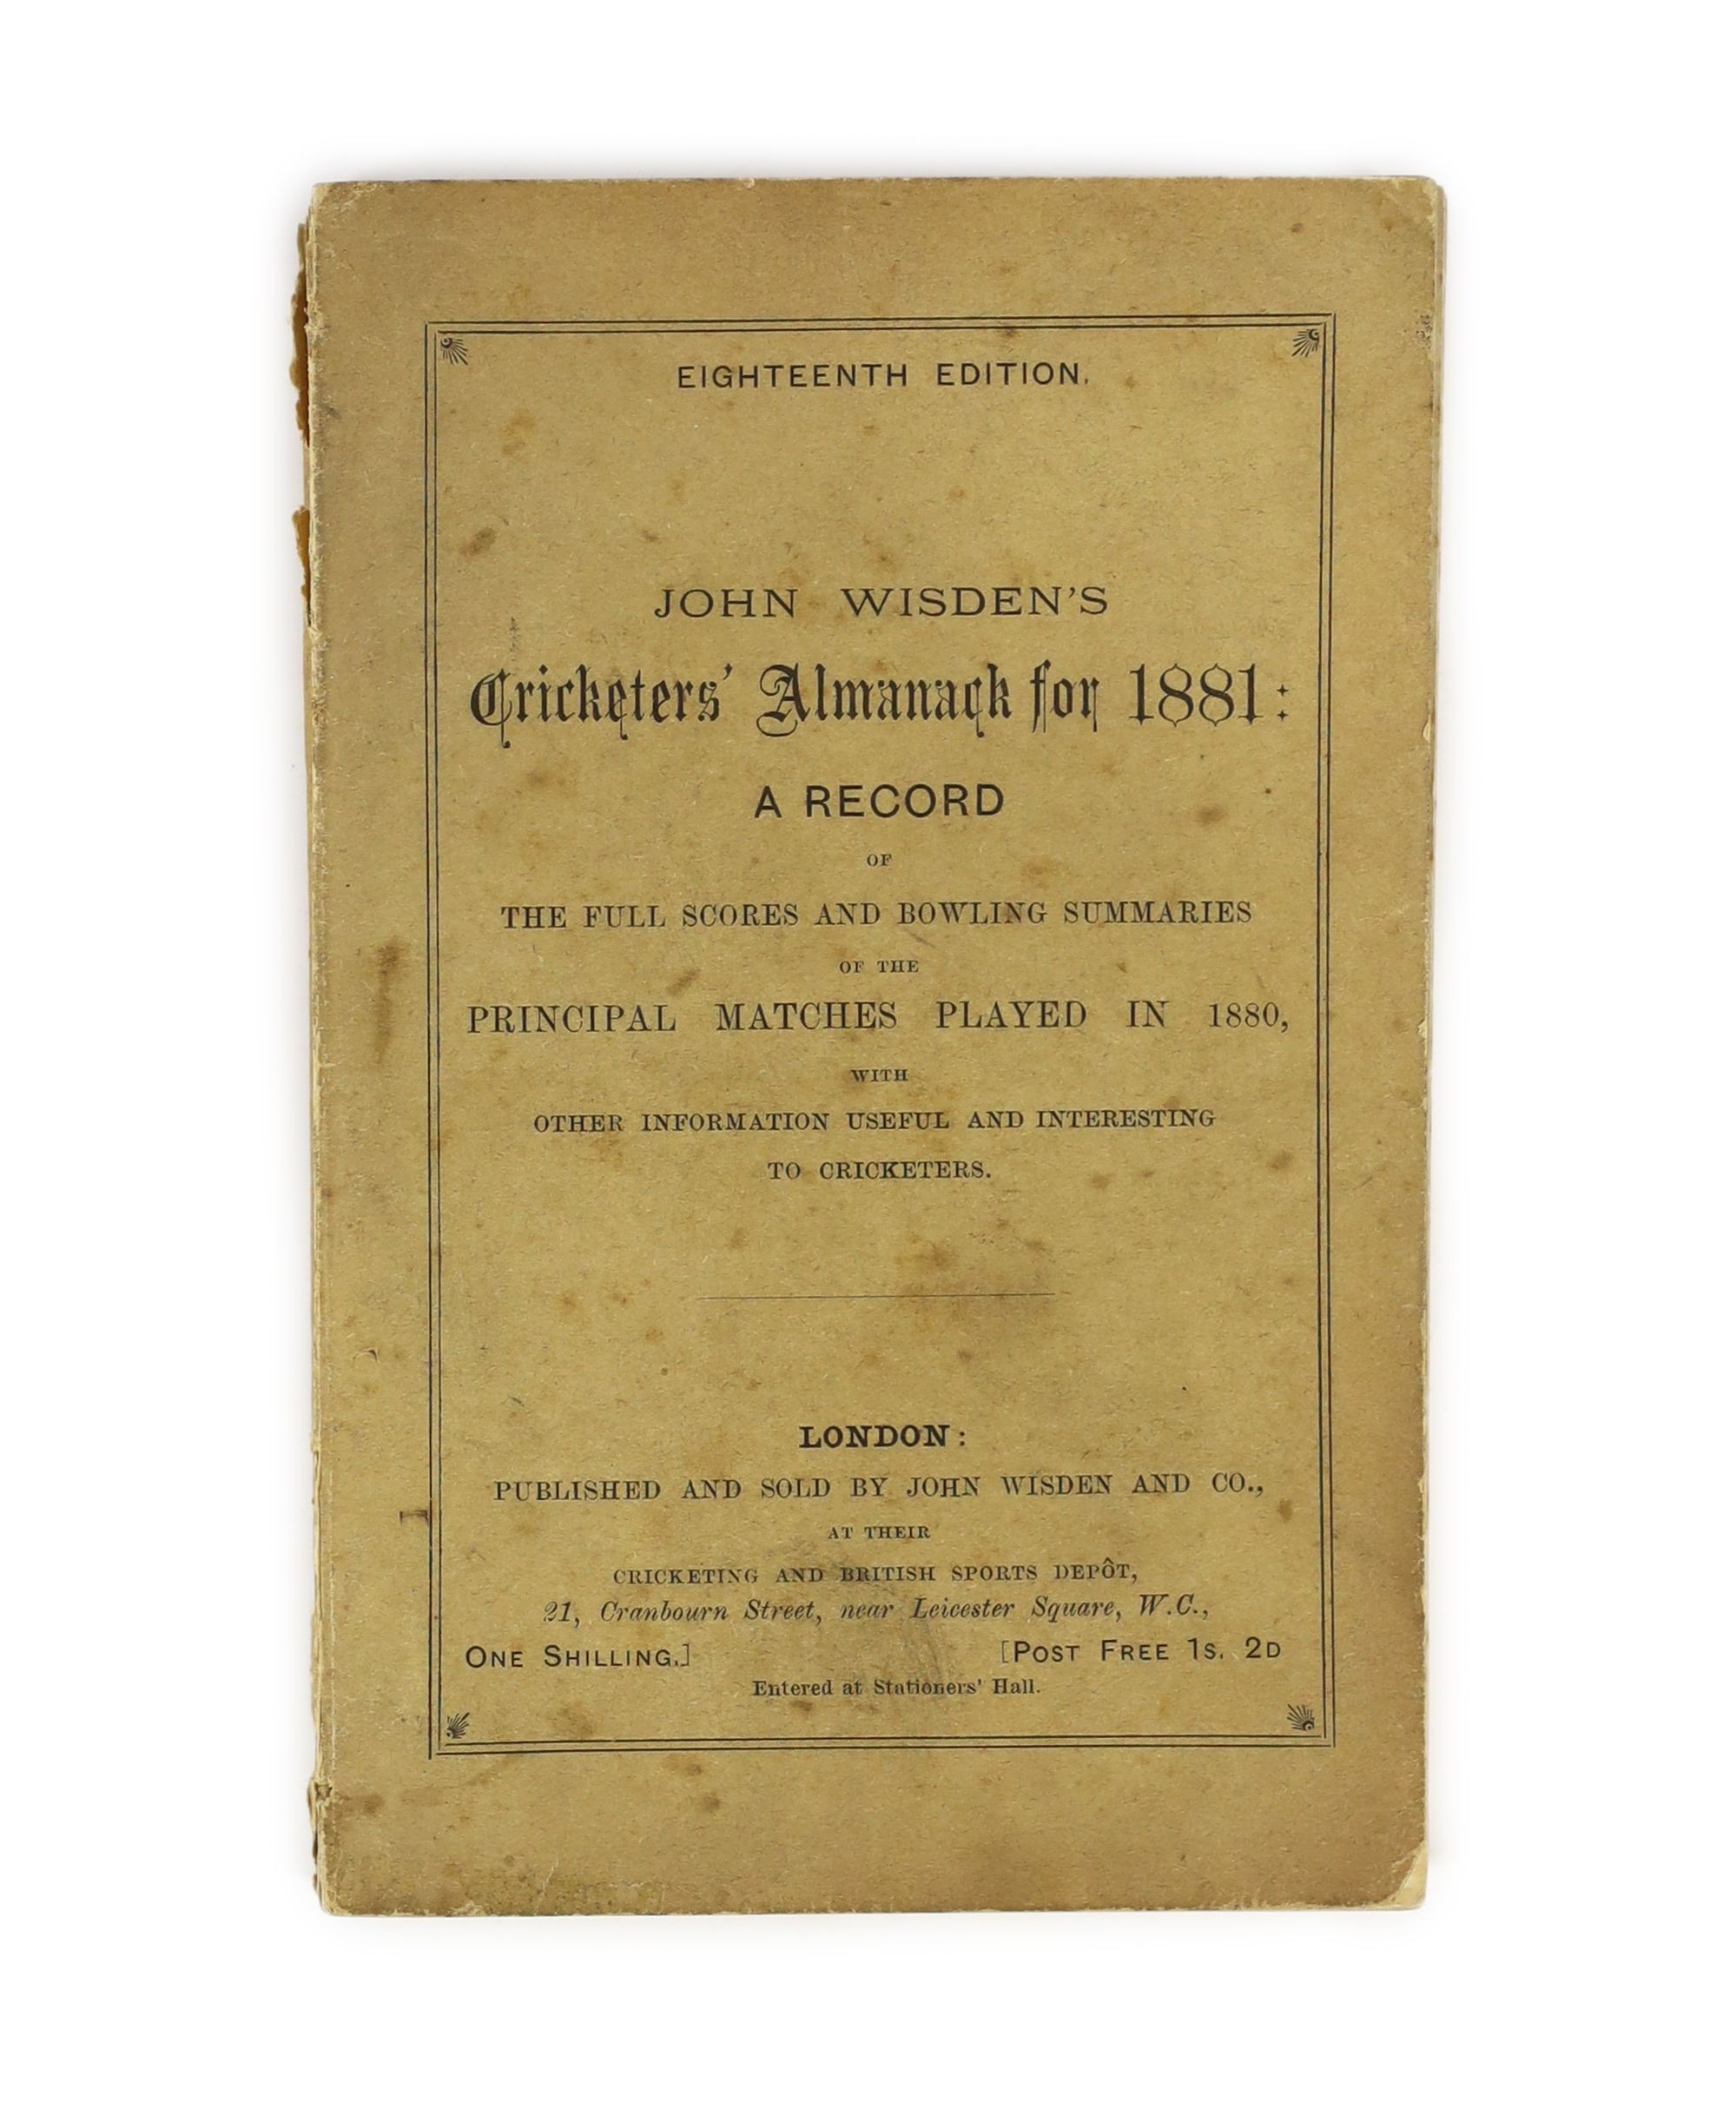 Wisden, John - Cricketers’ Almanack for 1881, 18th edition, original paper wrappers, tears to spine, spotting to endpapers.